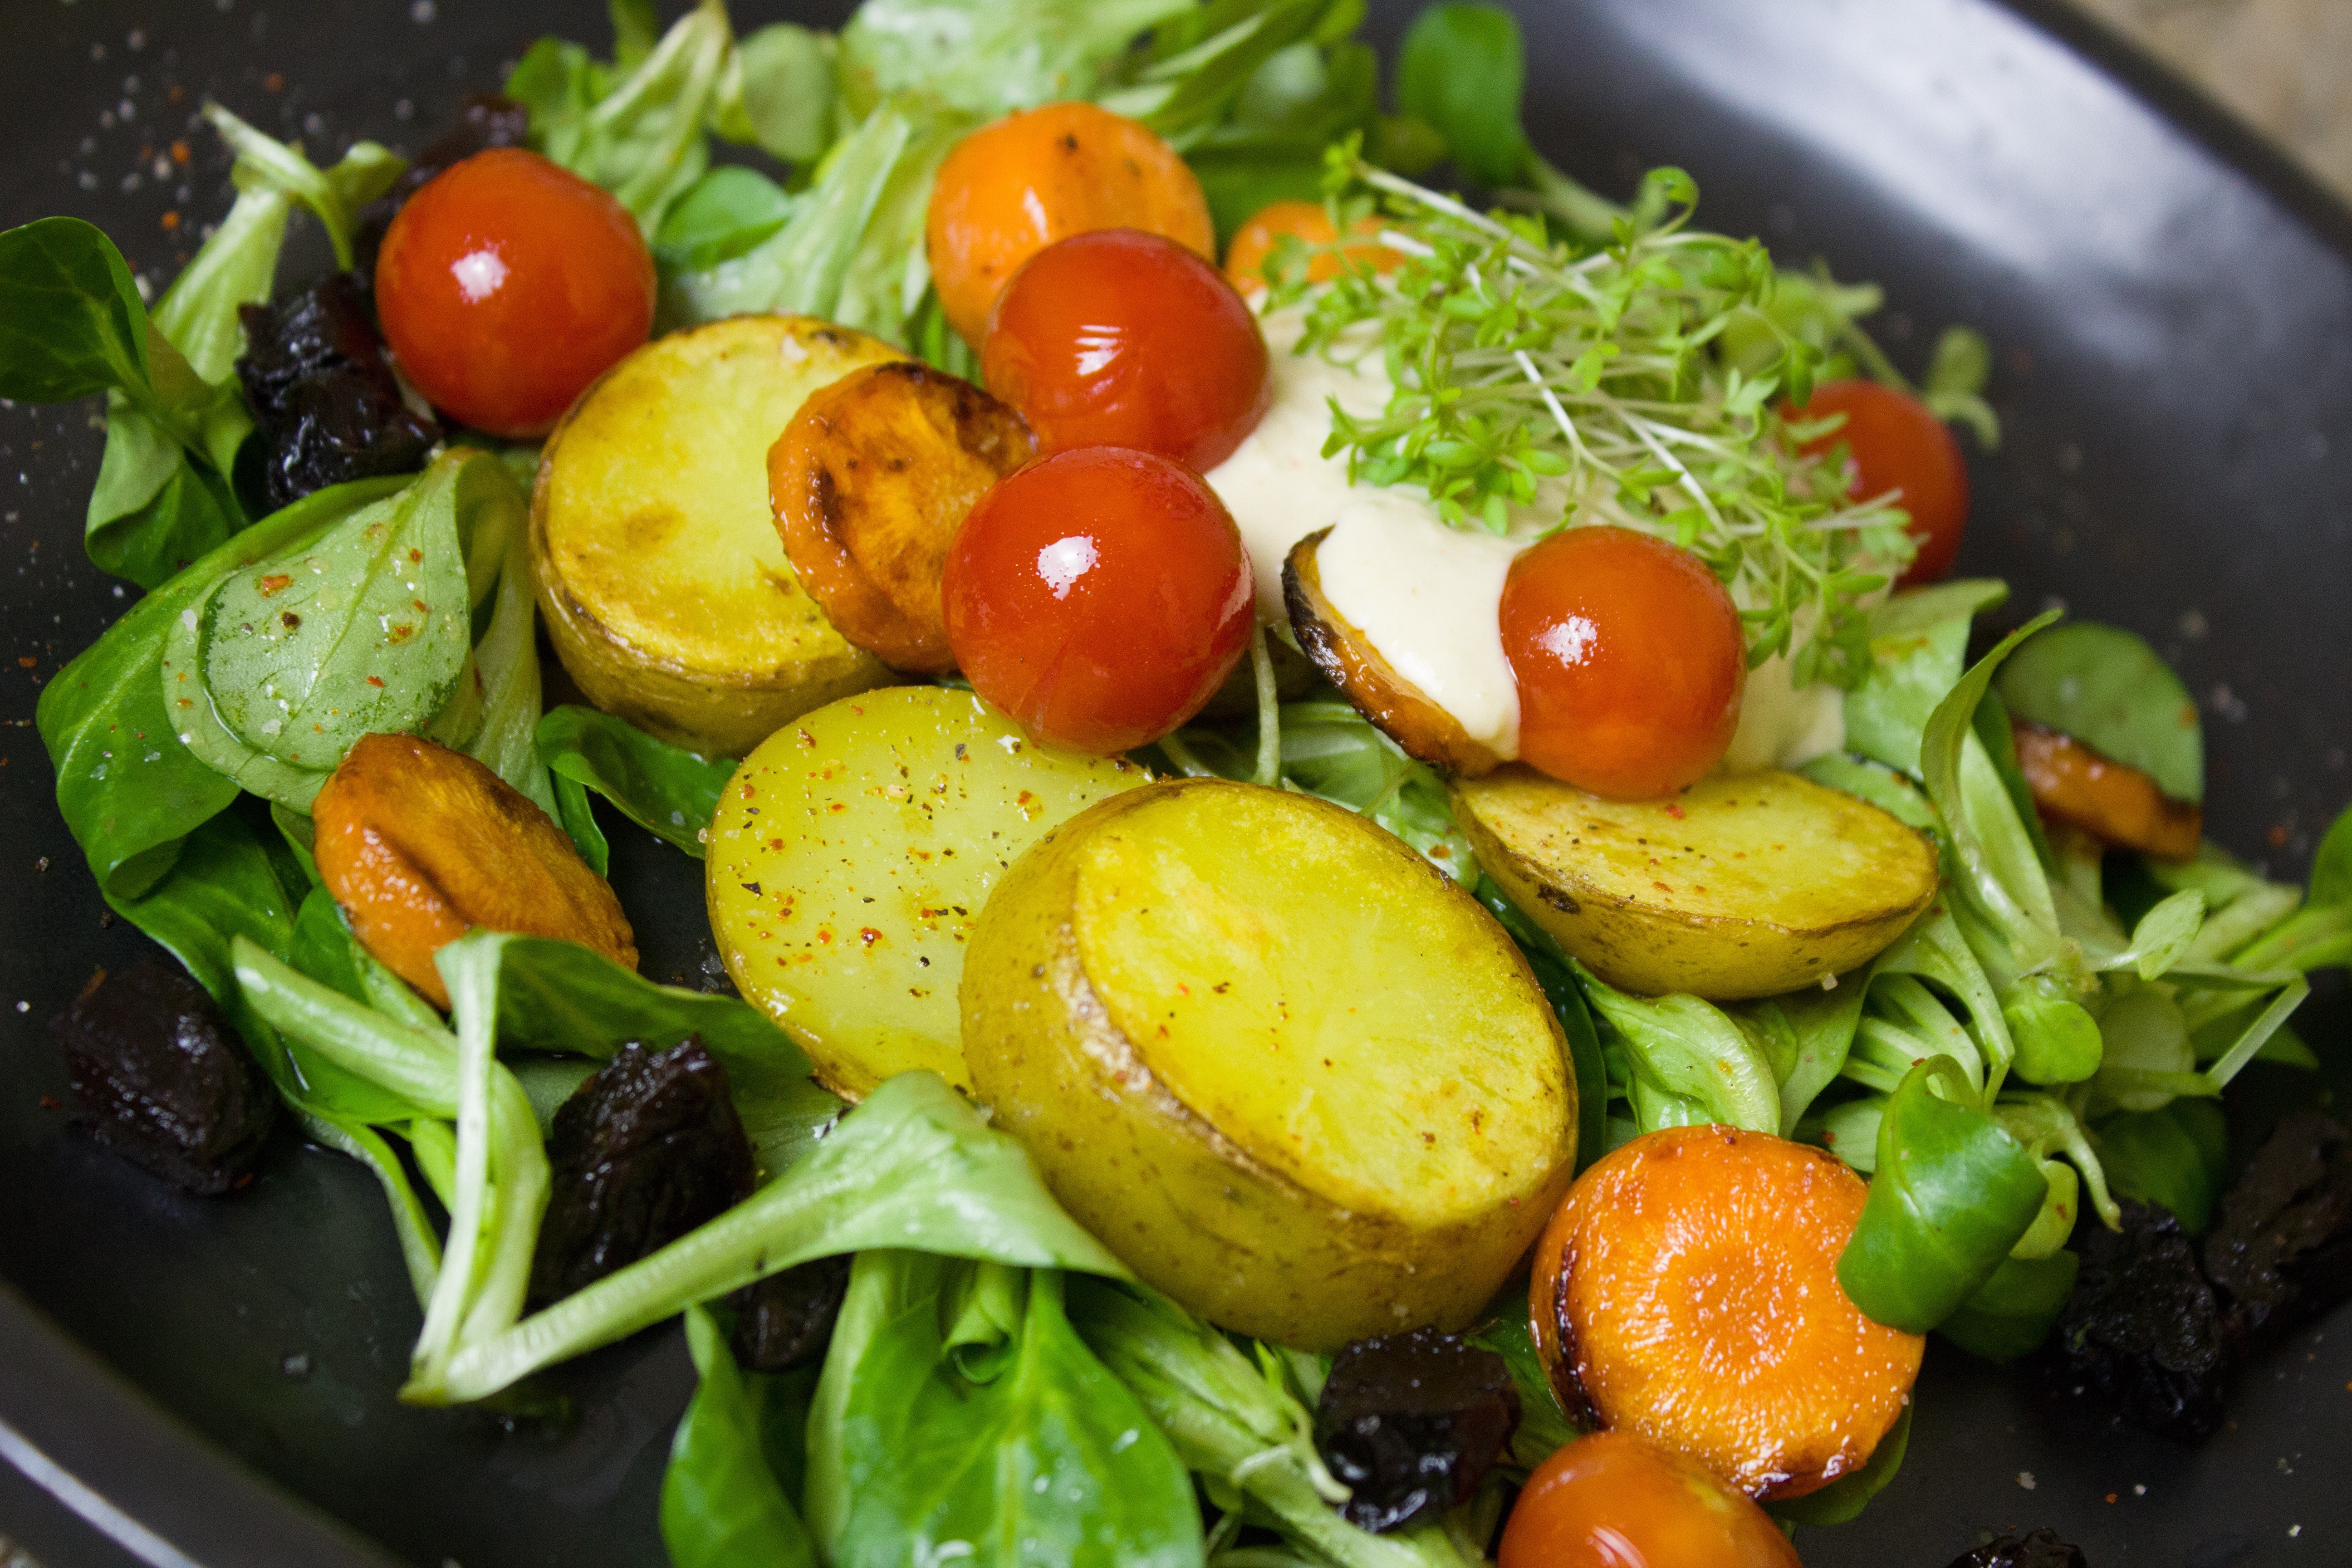 potatoes, carrots, tomatoes and green leaf vegetables